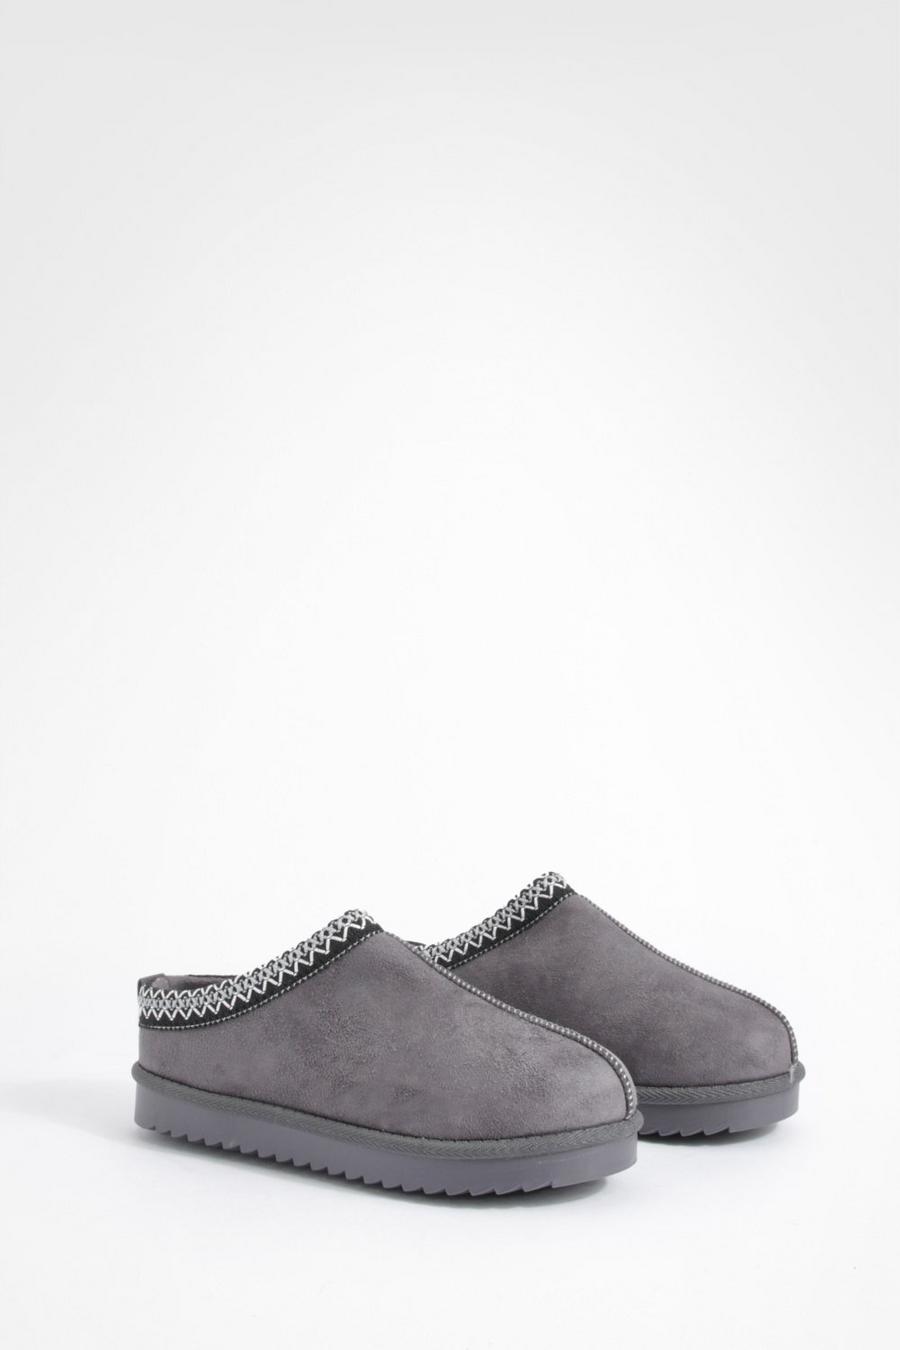 Dark grey Embroidered  Slip On Cosy Mules     